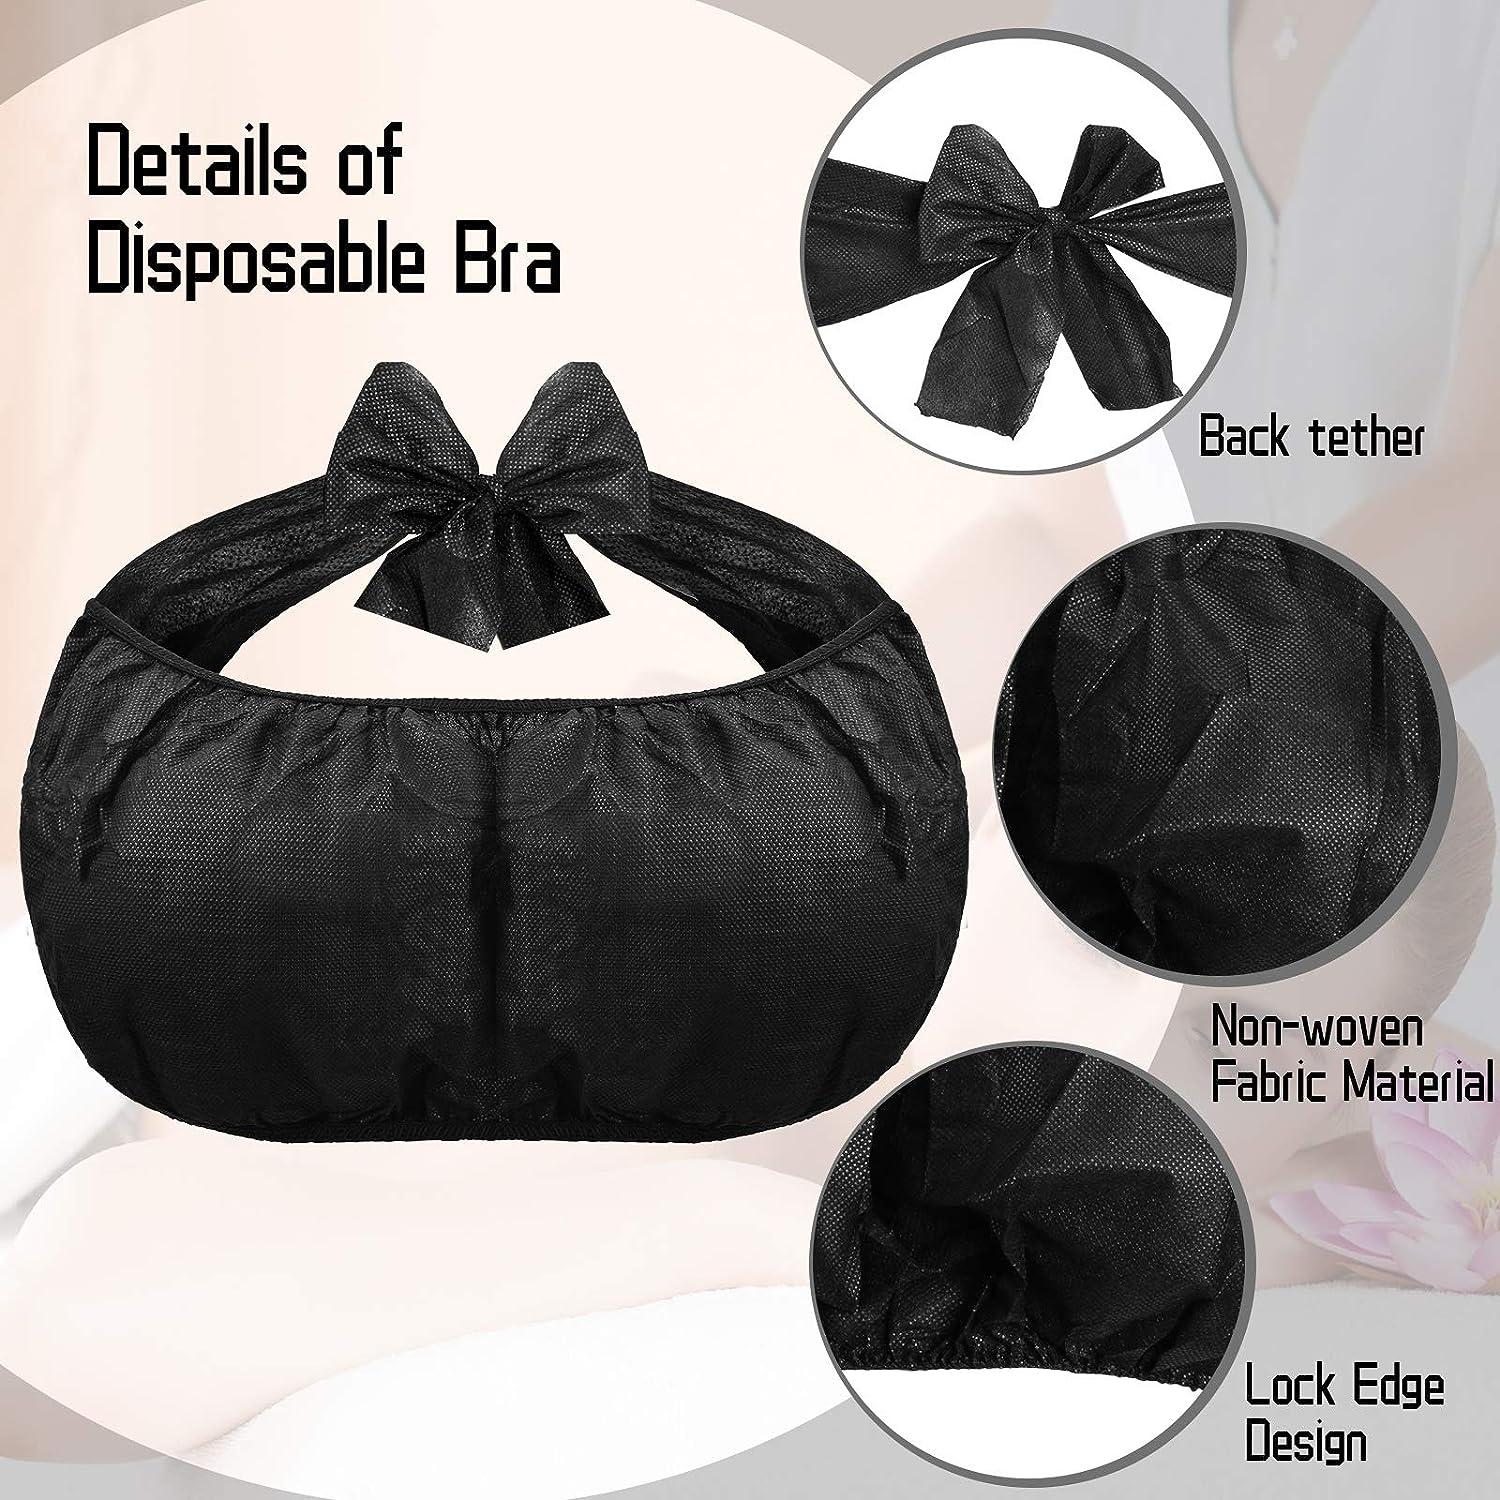 Disposable Bras - Appearus Spa Bra Top Brassieres Underwear for Spray  Tanning and Body Treatments, Black